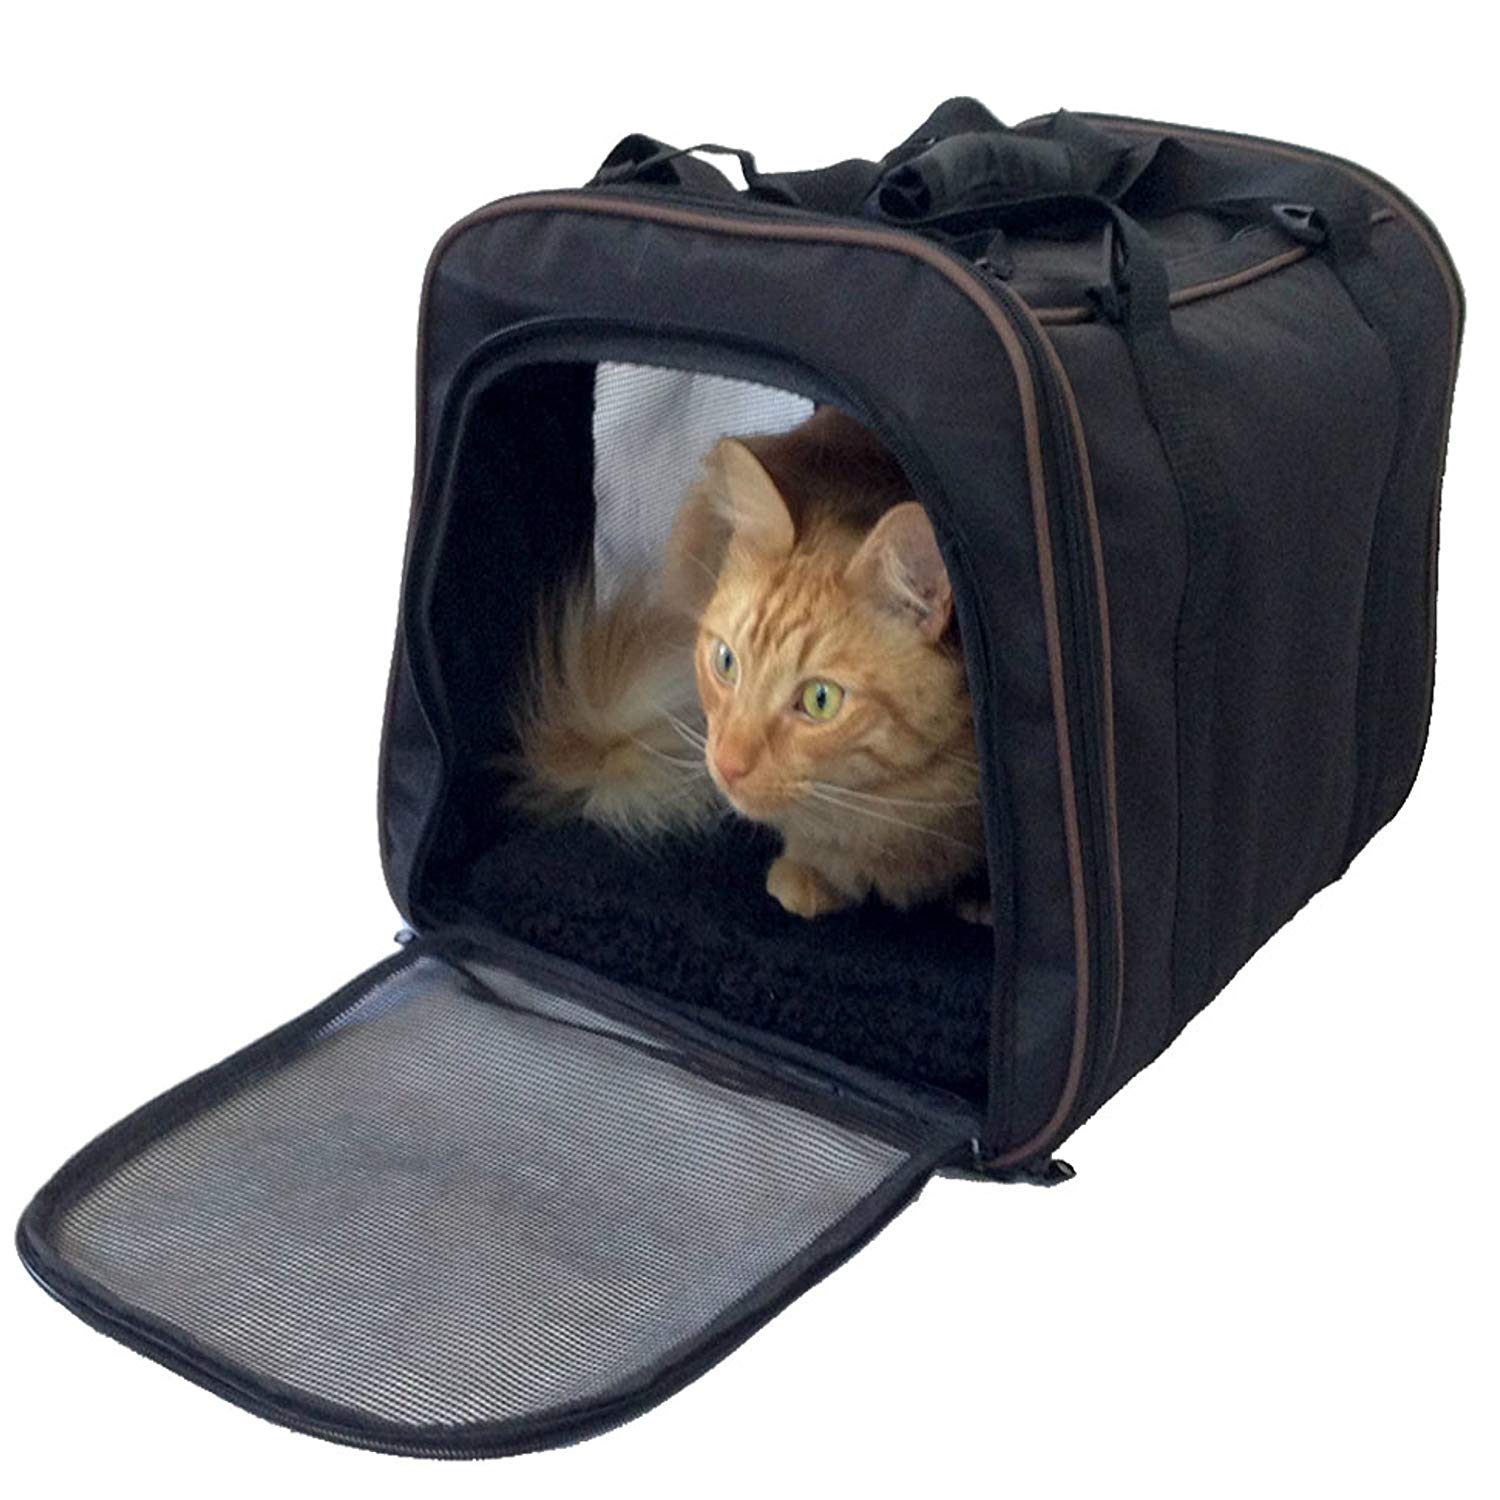 cat travel airline carrier